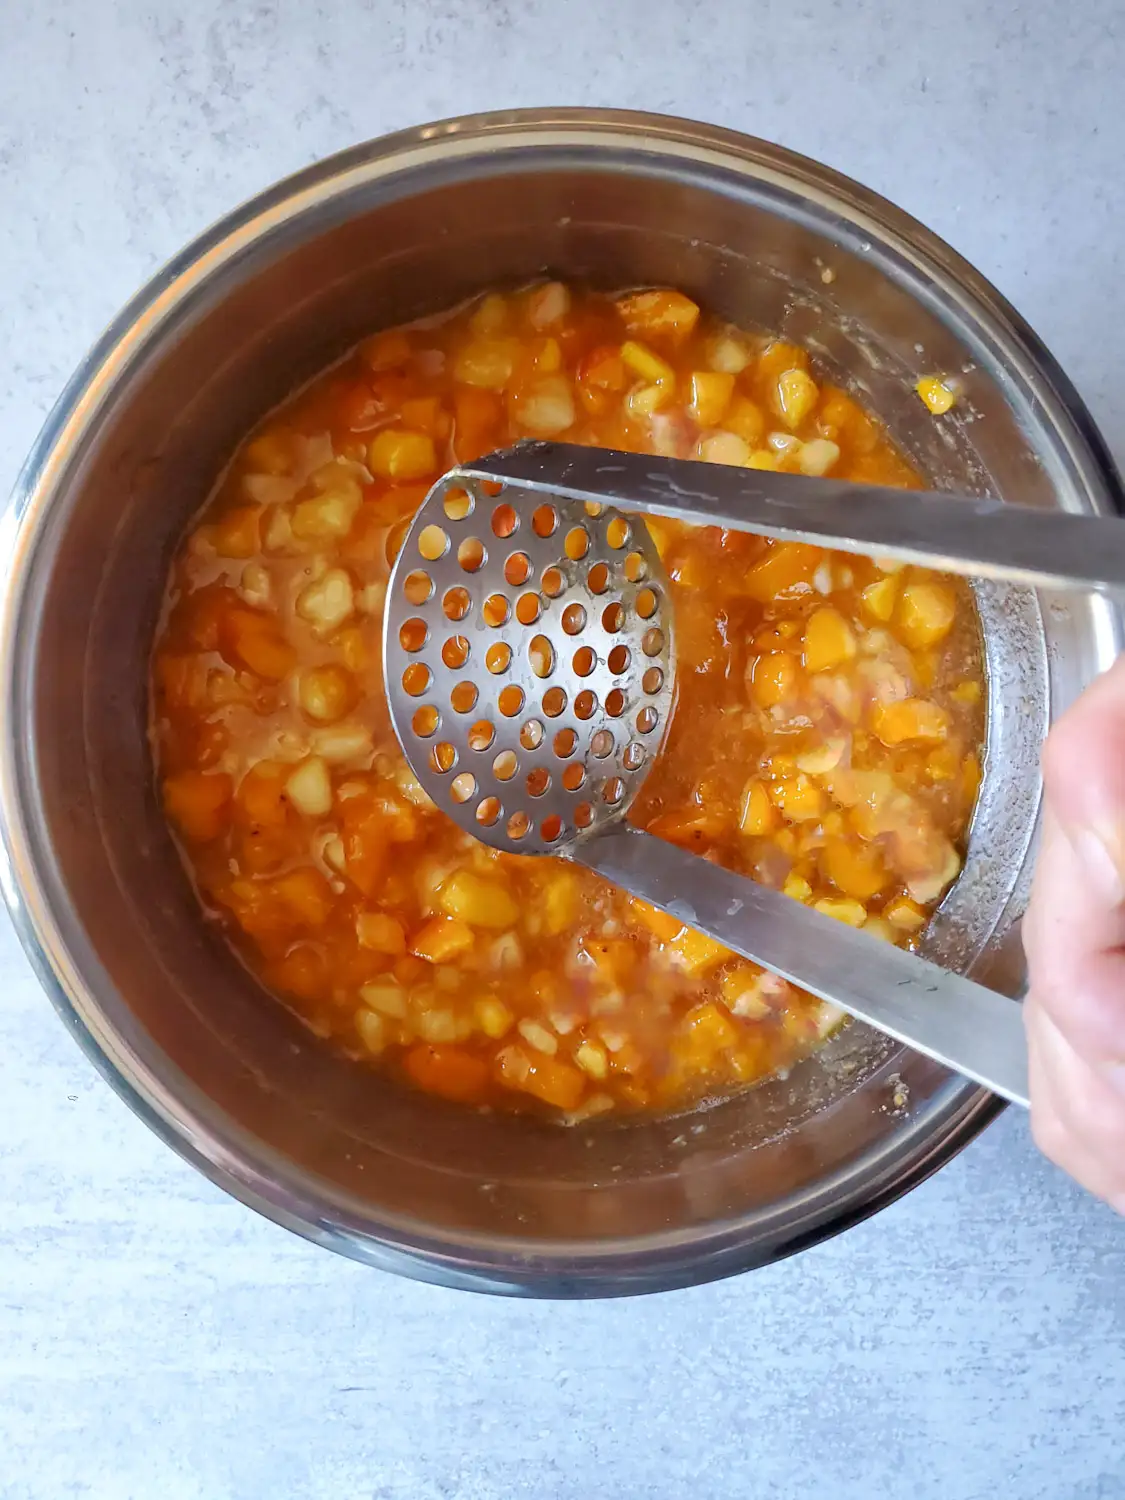 A stainless steel masher is resting over a stainless steel bowl full of macerated peaches that will turn into low sugar peach jam. Chunks of the fruit are still visible as they have not been fully broken down into jam consistency. 